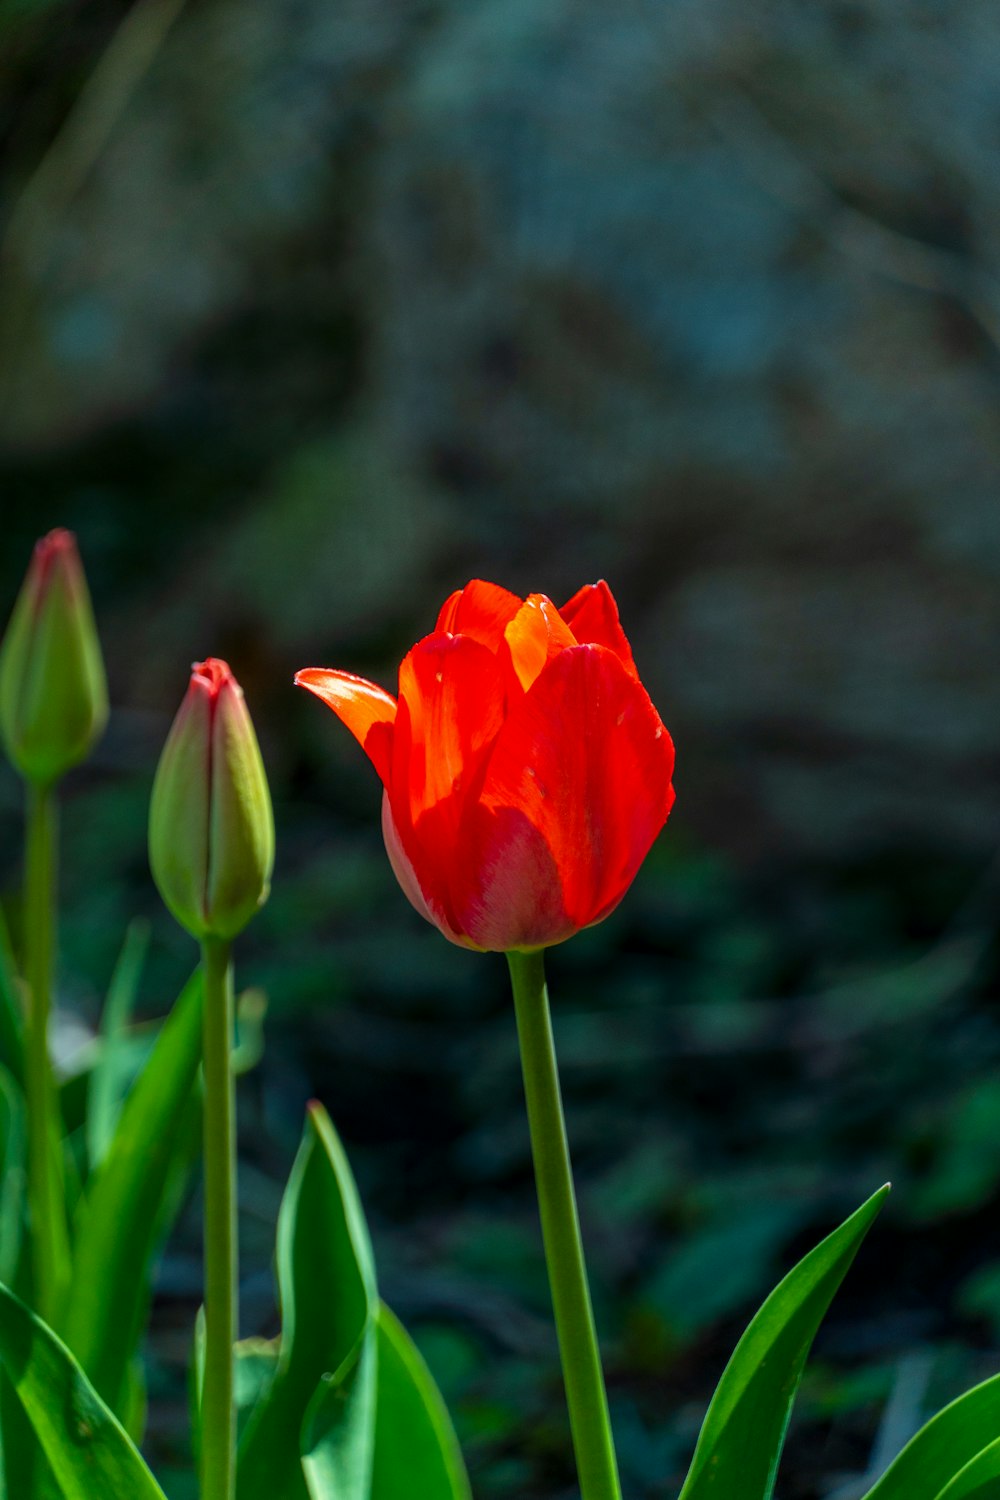 a single red tulip stands out among the green leaves